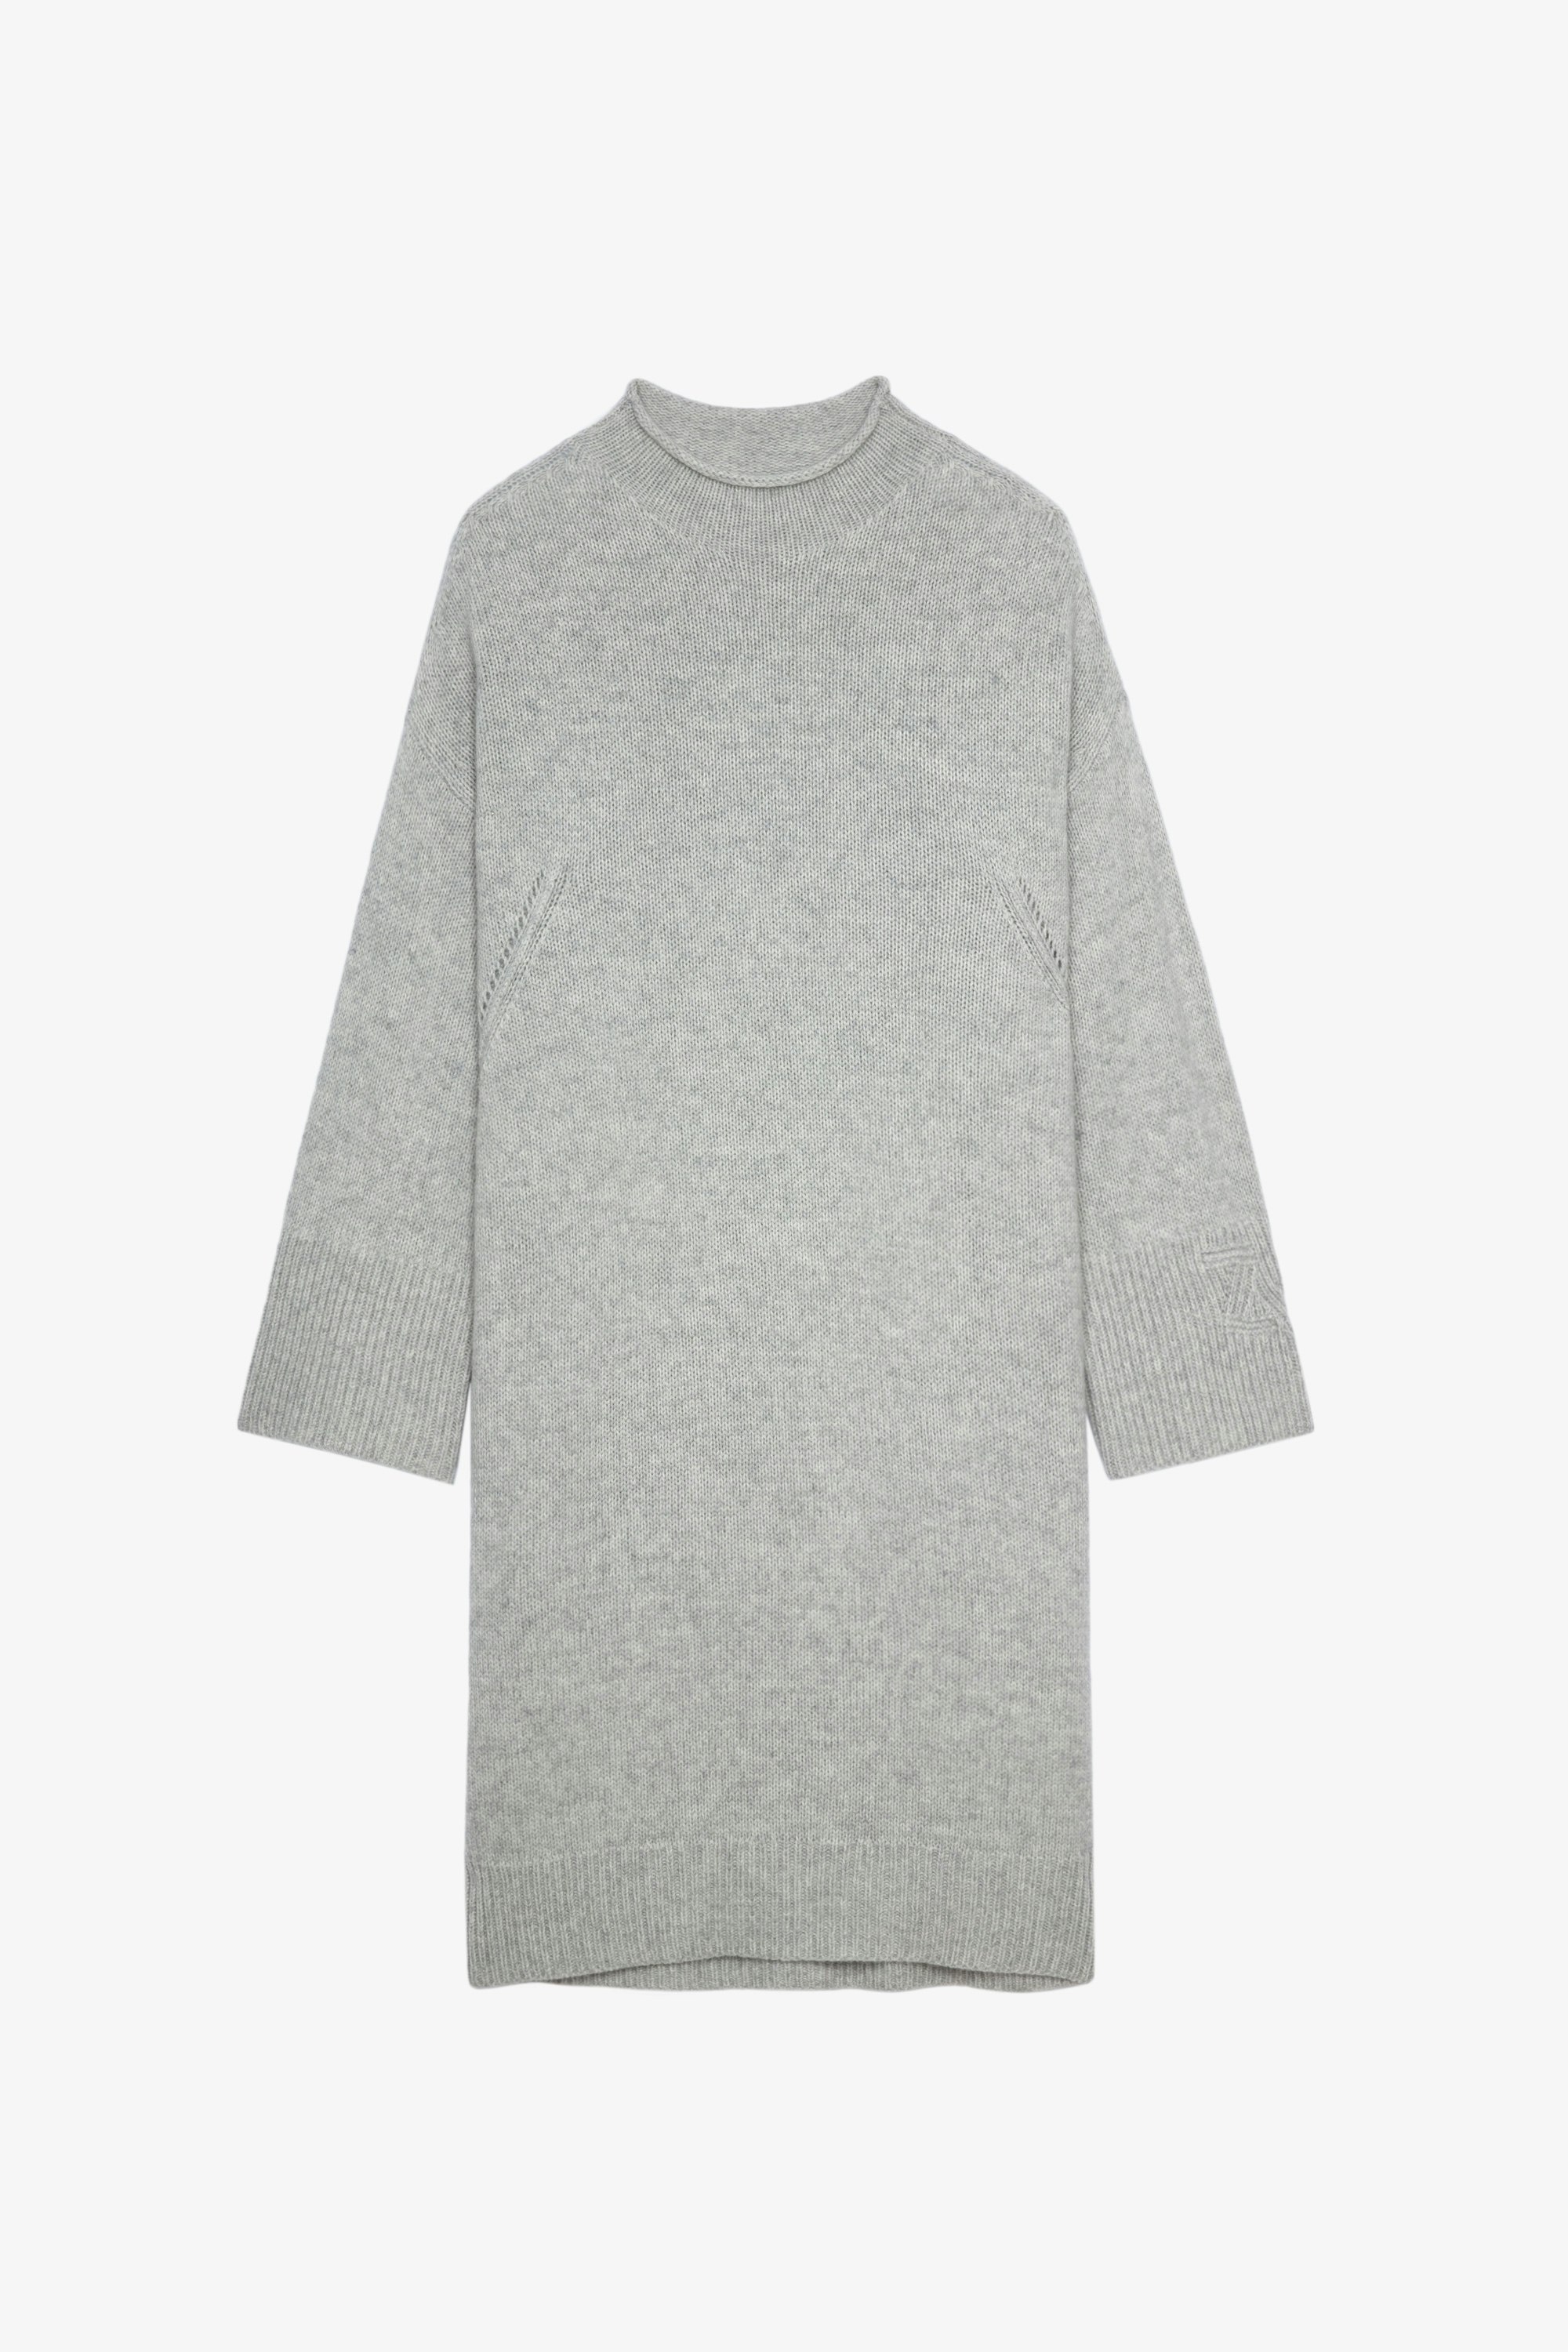 Selena ワンピース Oversized grey marl dress with round neckline and long sleeves 